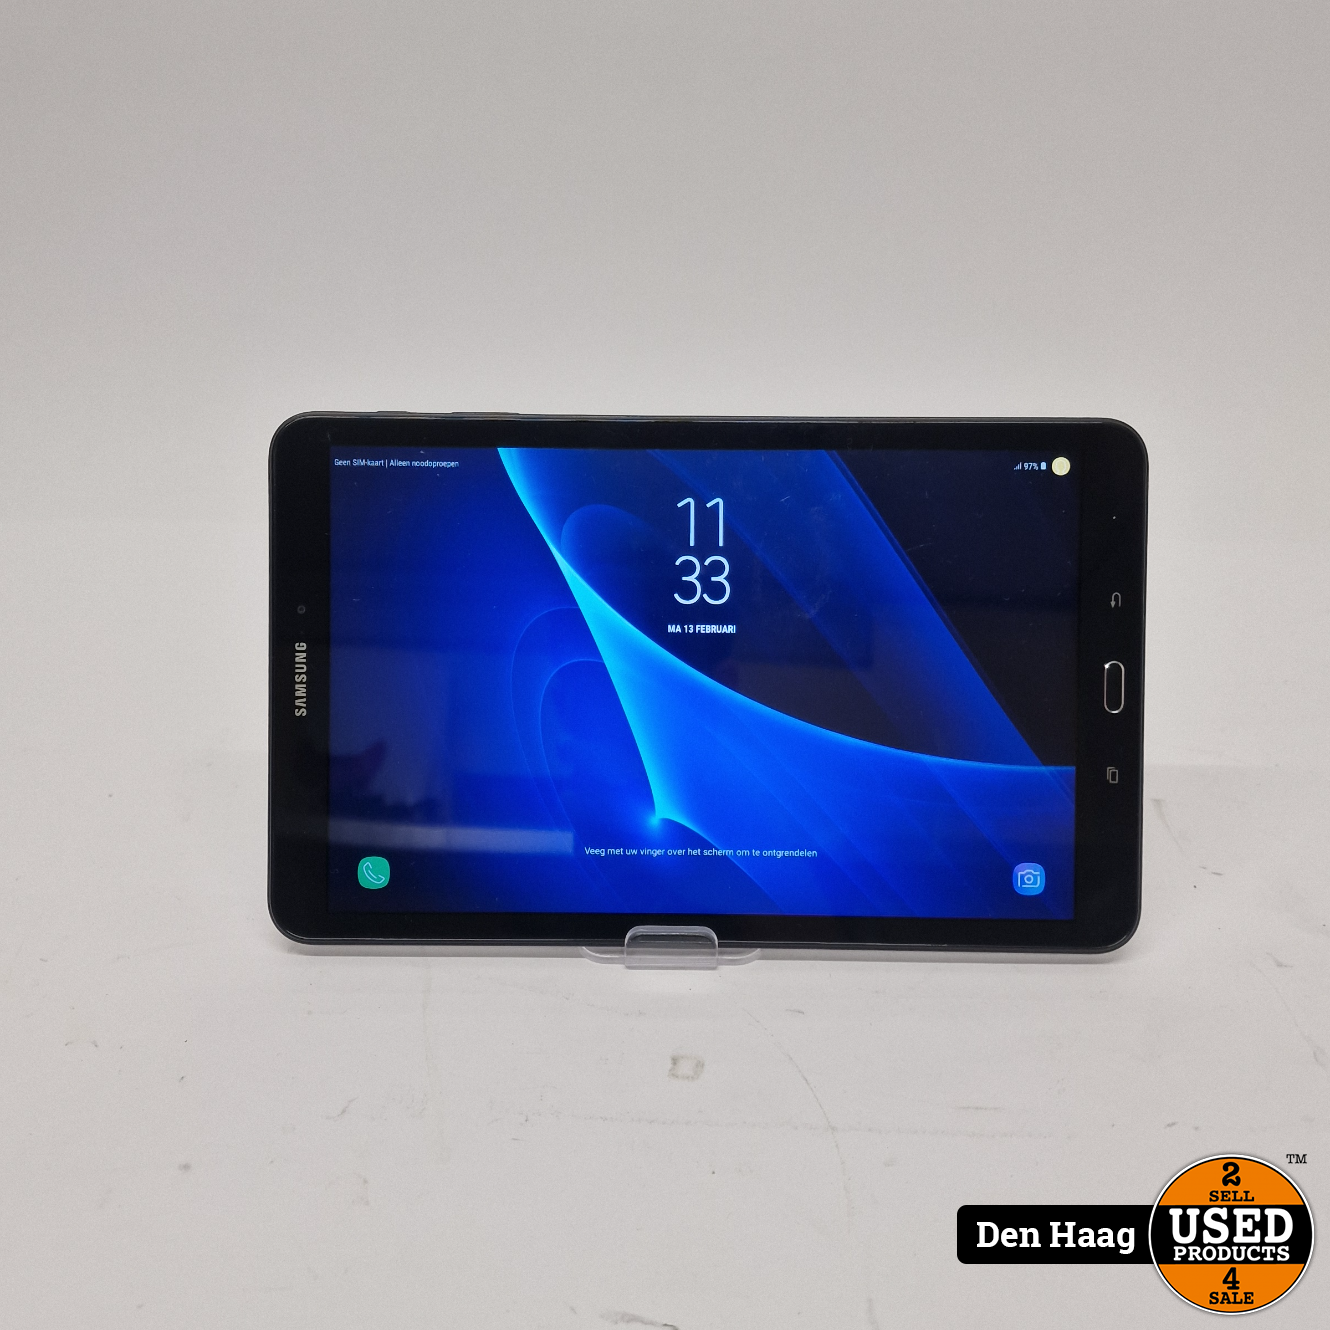 straal heuvel stereo Samsung Galaxy Tab A6 SM-T585 16Gb Wifi + 4G | nette staat - Used Products  Den Haag